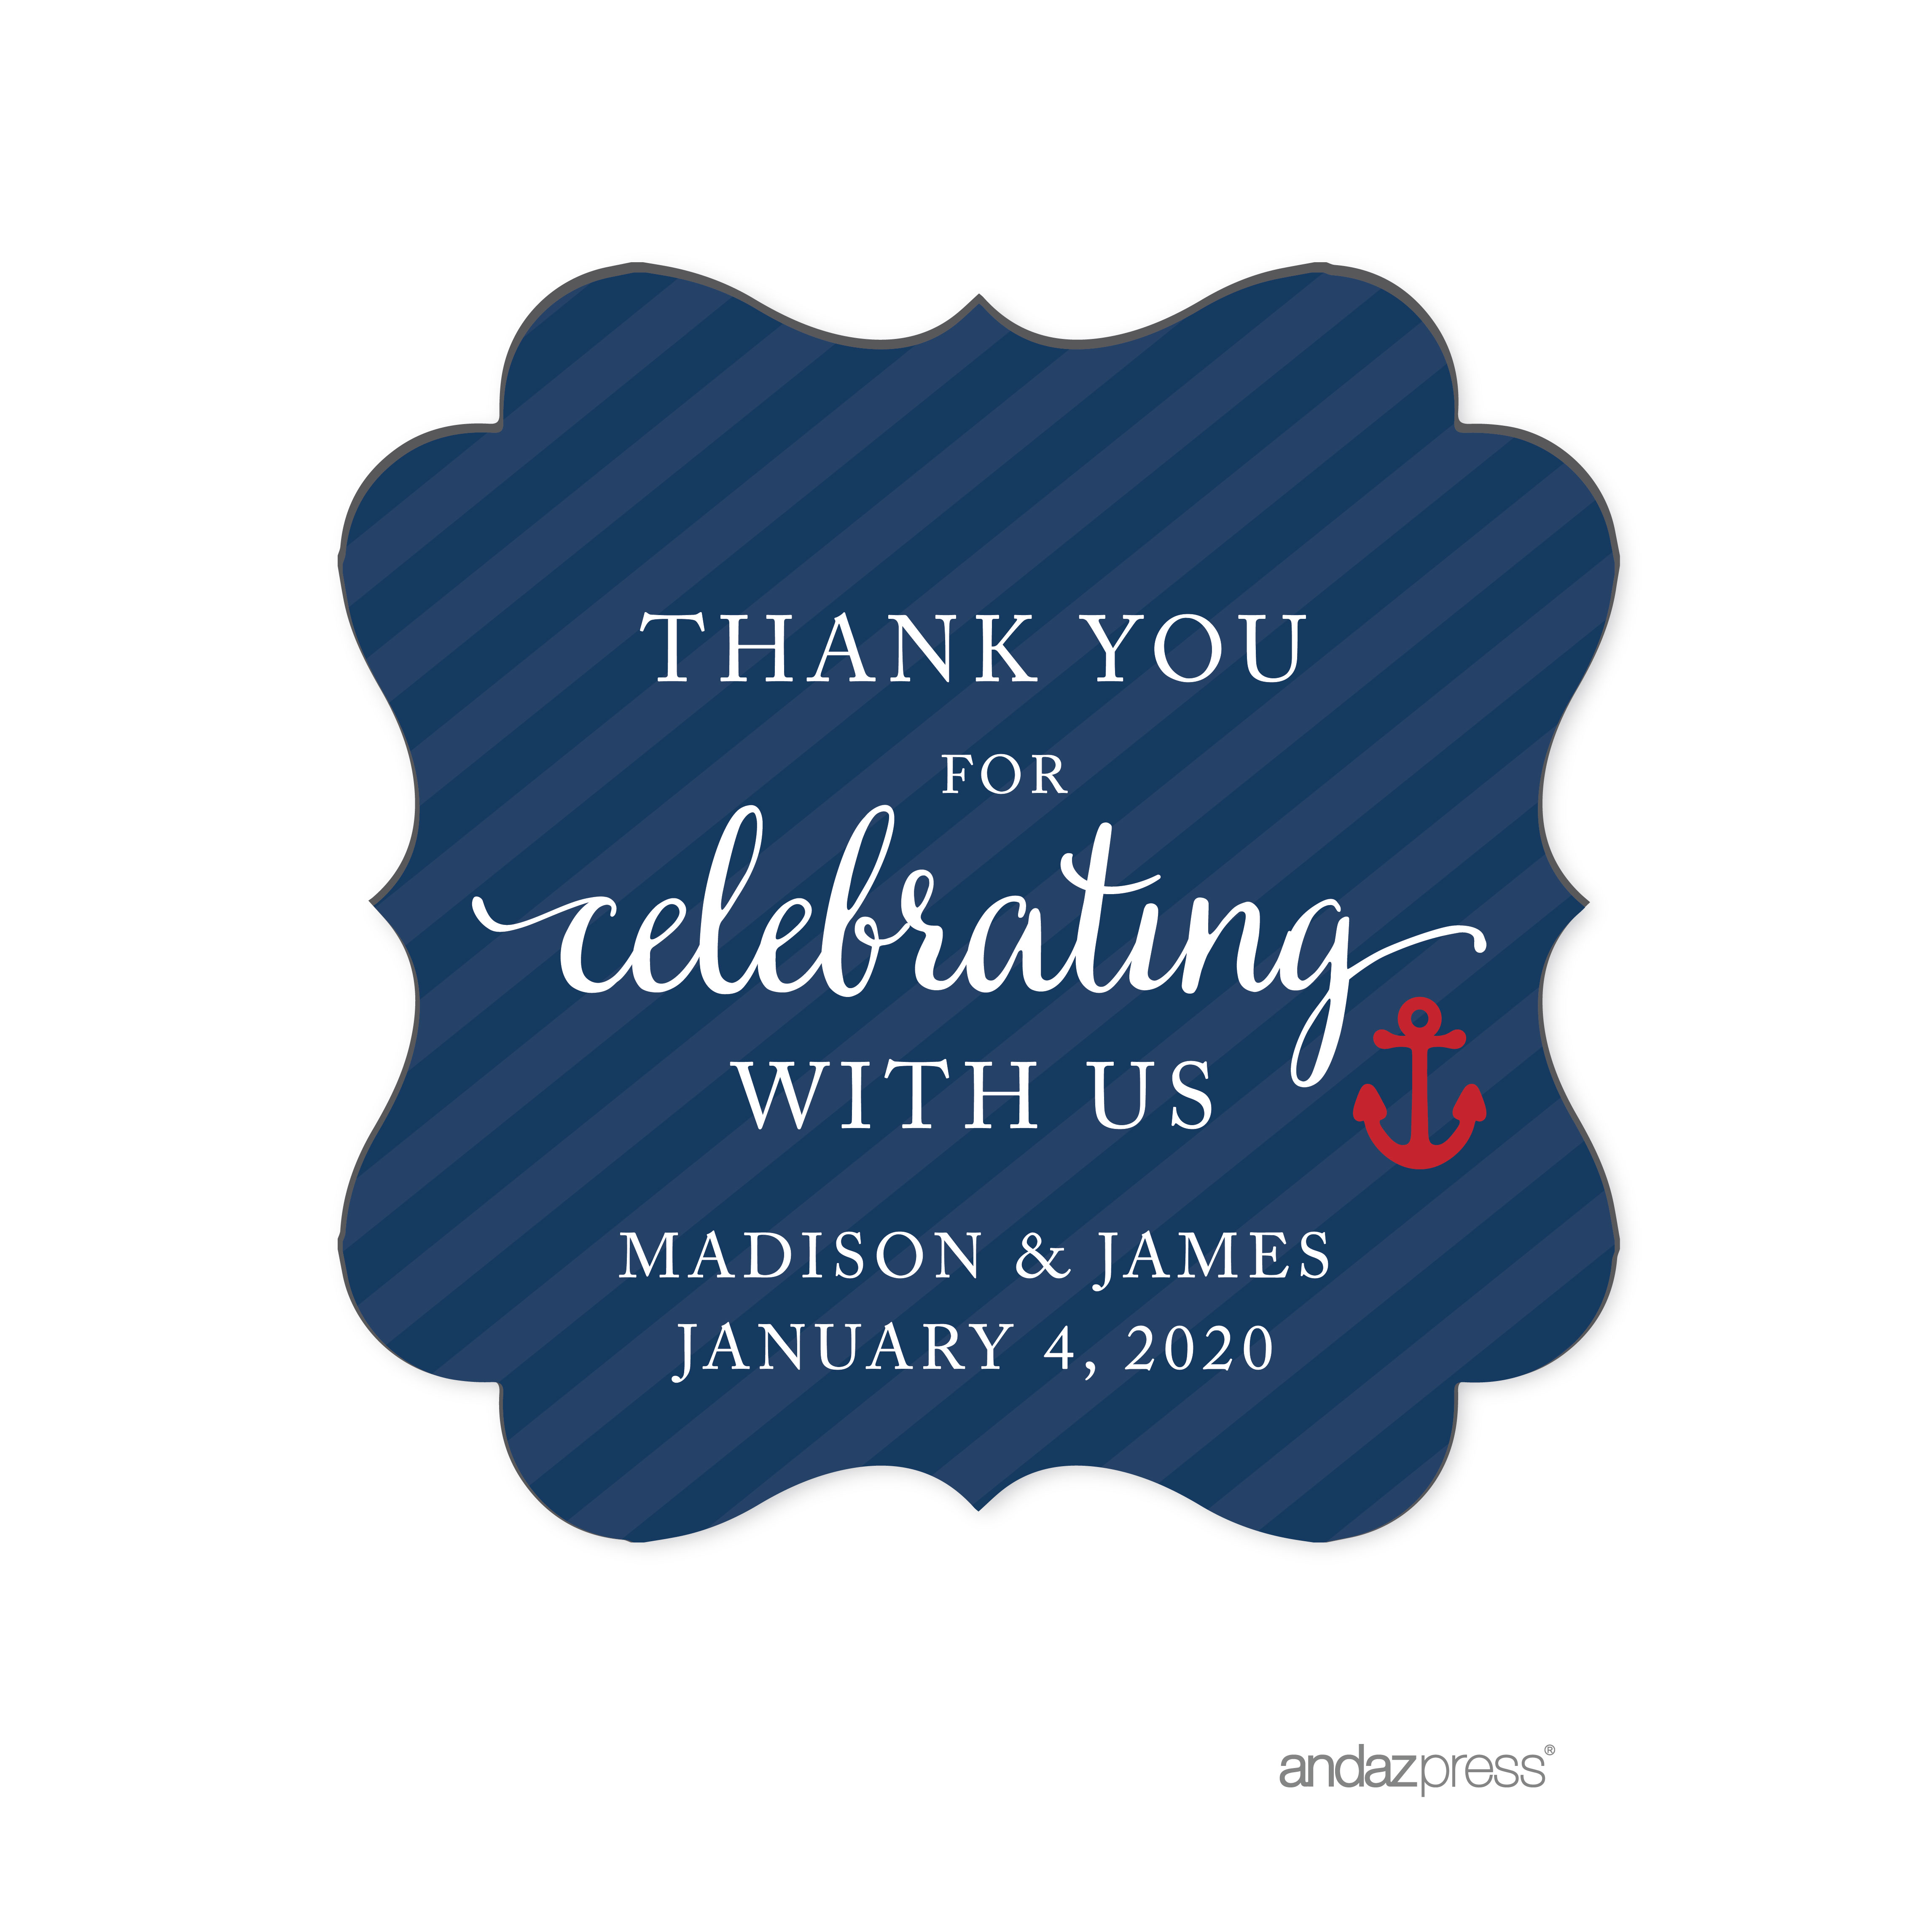 APC57780 Andaz Press Nautical Baby Shower Collection, Personalized Fancy Frame Gift Tags, Thank You for Celebrating with Us, 24-pack, Custom Made Name for Themed Party Favors, Gifts, Decorations-02